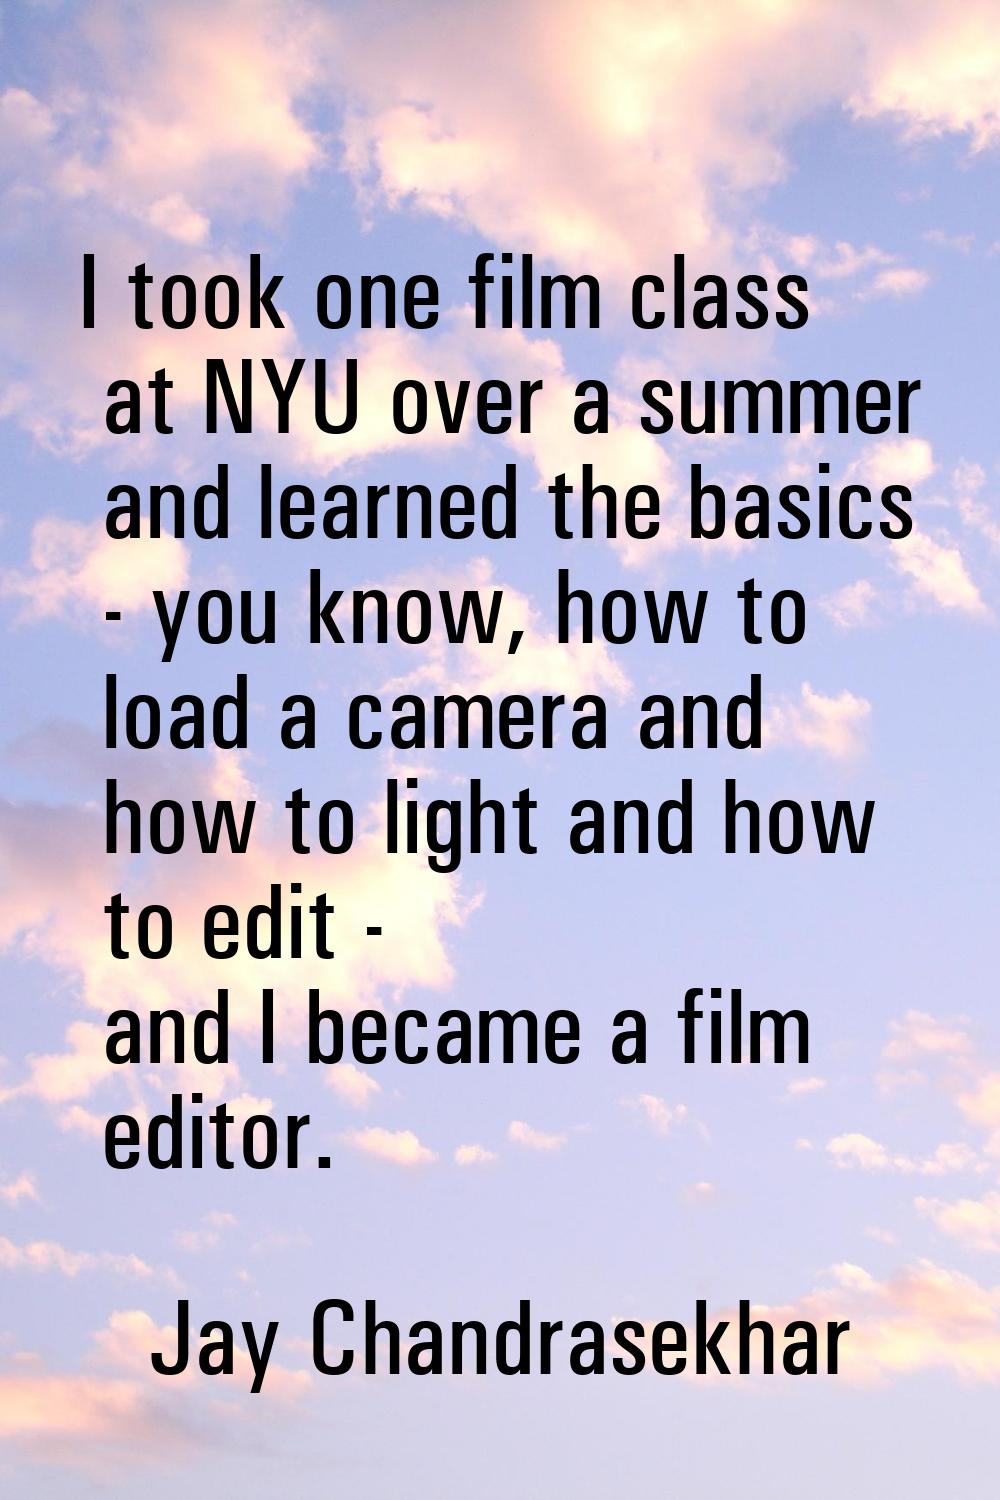 I took one film class at NYU over a summer and learned the basics - you know, how to load a camera 